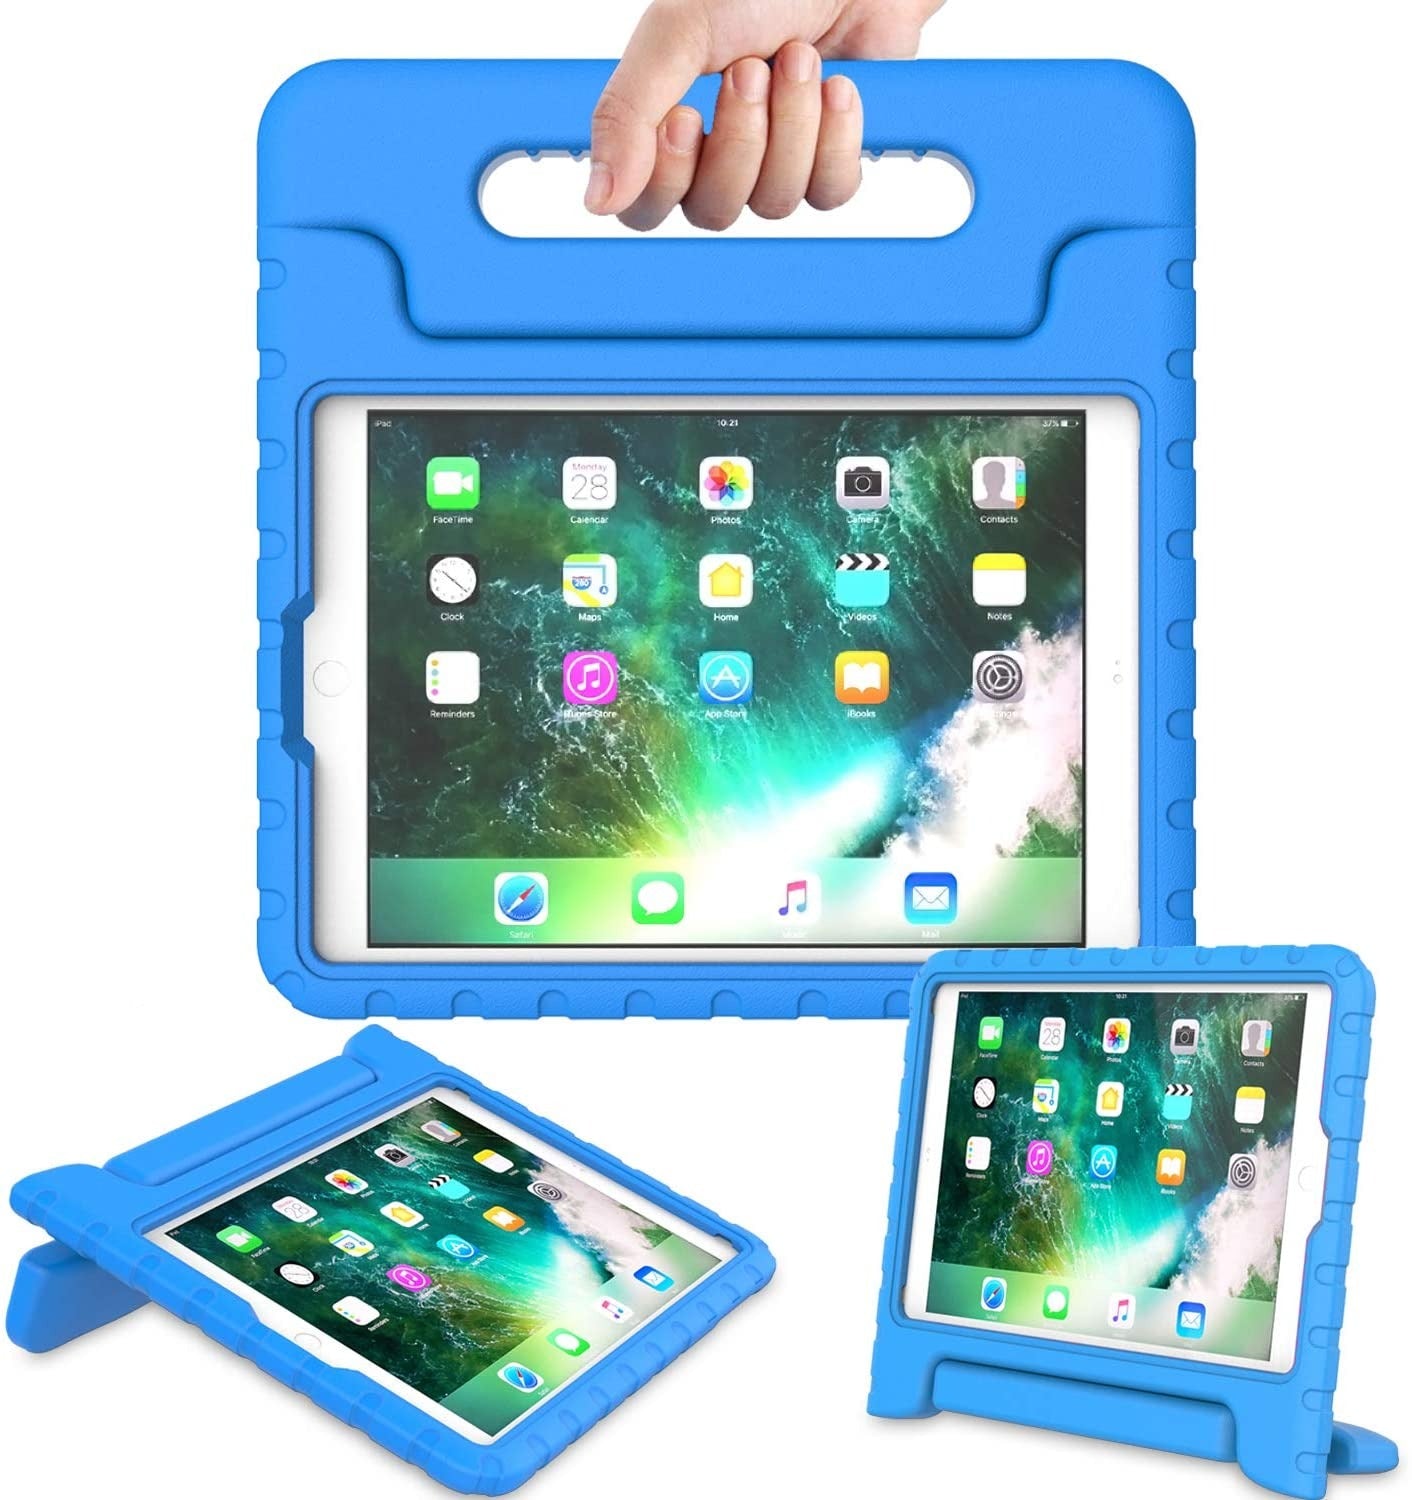 AVAWO Kids Case for New iPad 9.7 2017 & 2018 Release - Light Weight Shock Proof Convertible Handle - e4cents